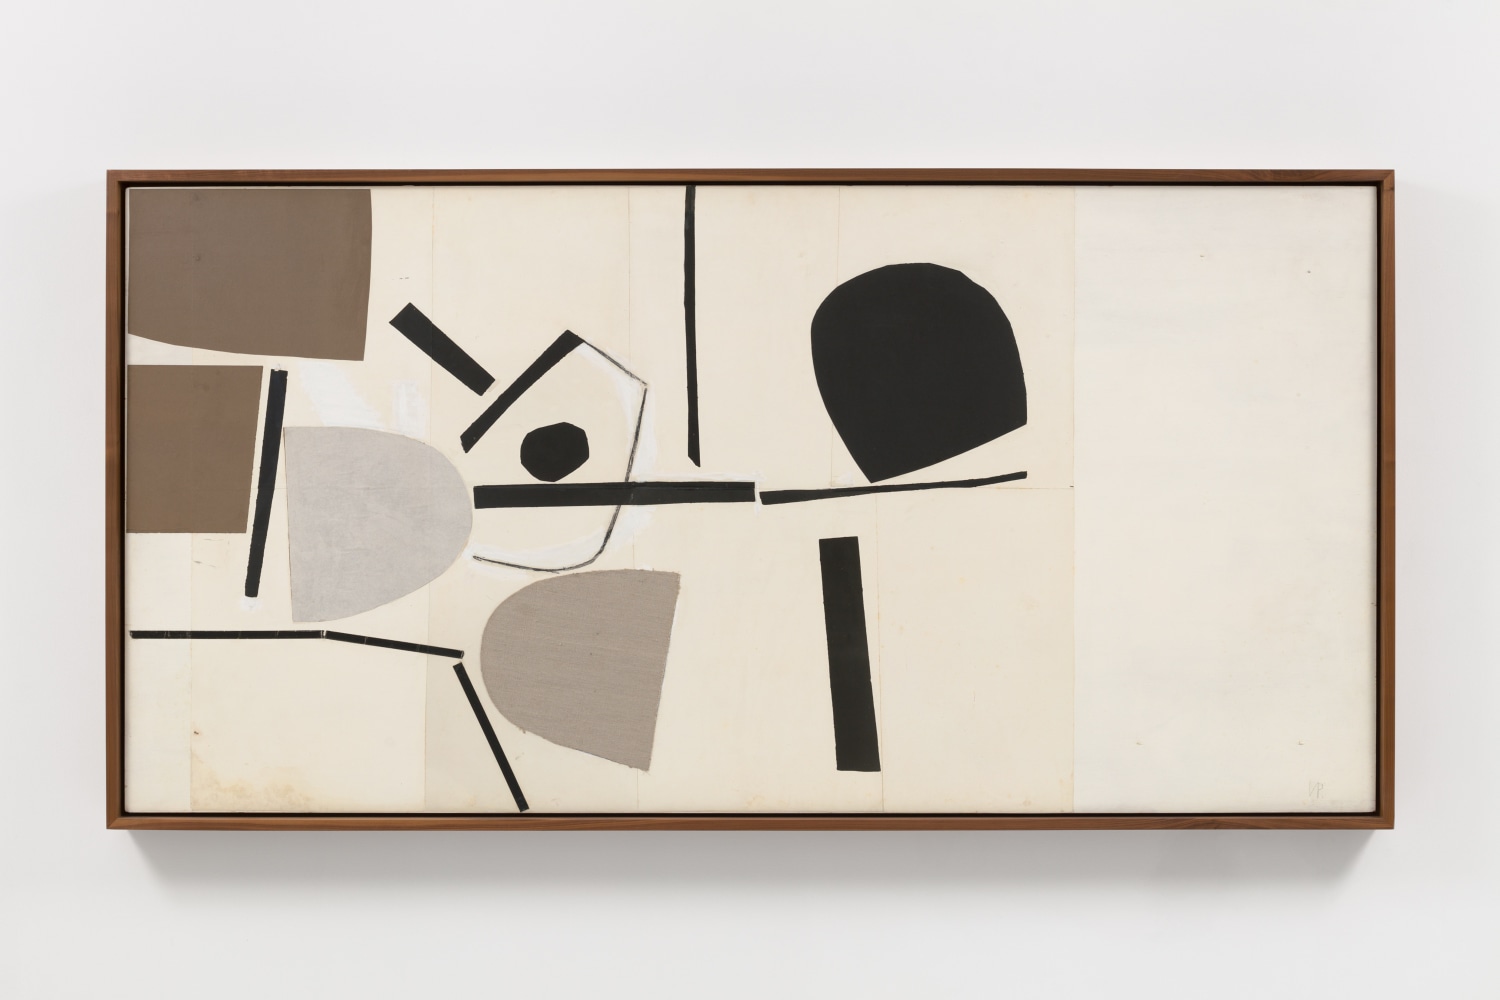 Abstract in Black, White and Umber, 1960

collage and photostat

50 3/8&amp;nbsp;&amp;times; 98 3/8 in. / 128&amp;nbsp;&amp;times; 249.9 cm